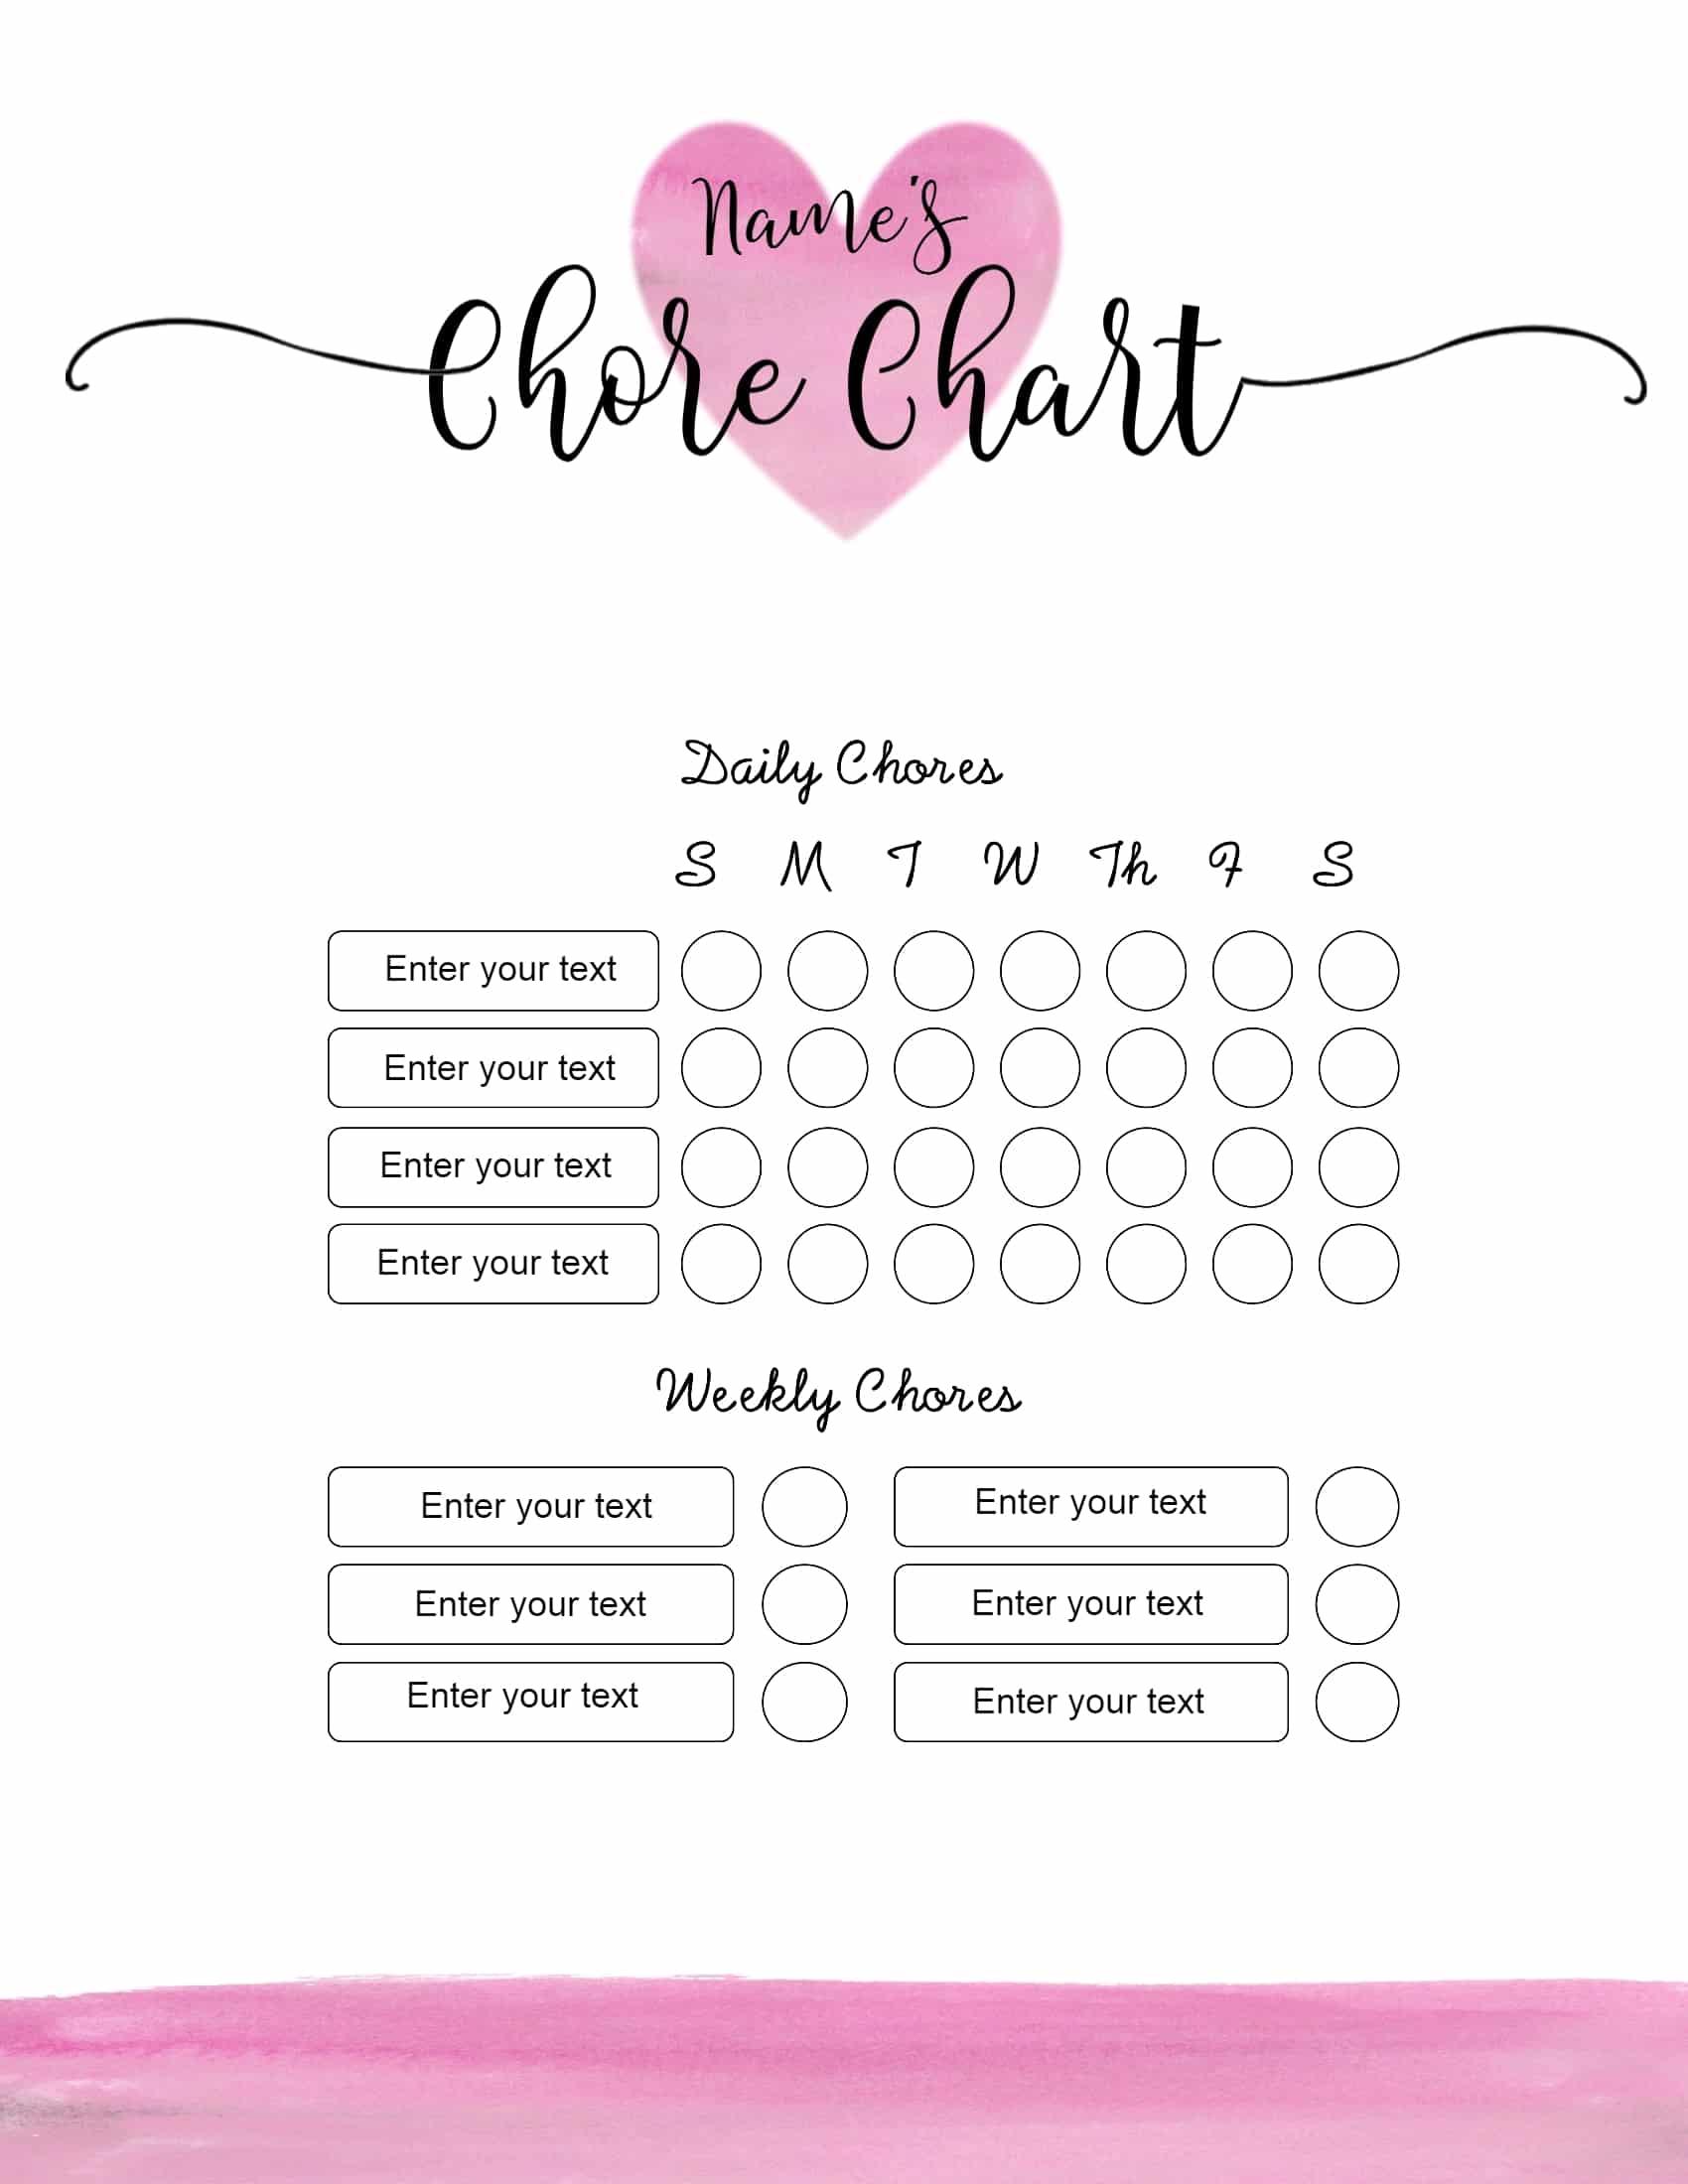 free-chore-chart-template-101-different-designs-free-download-nude